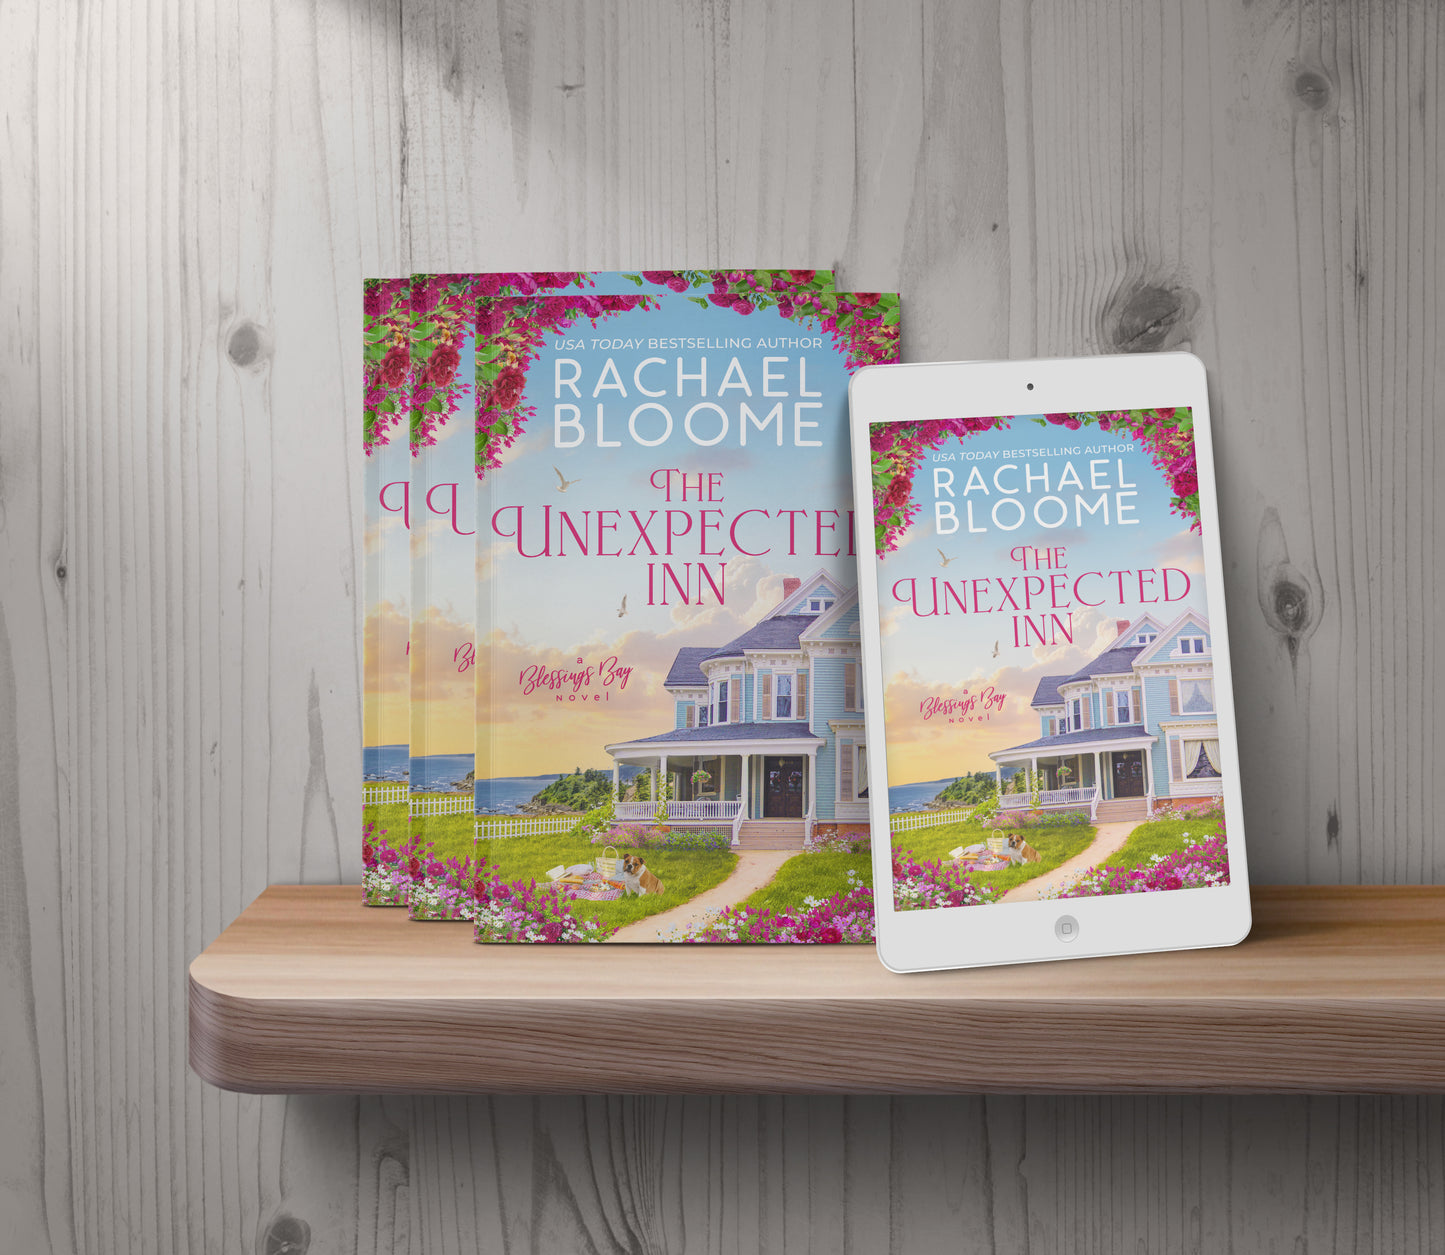 The Unexpected Inn: A Blessings Bay Novel (Blessings Bay Series Book 2)